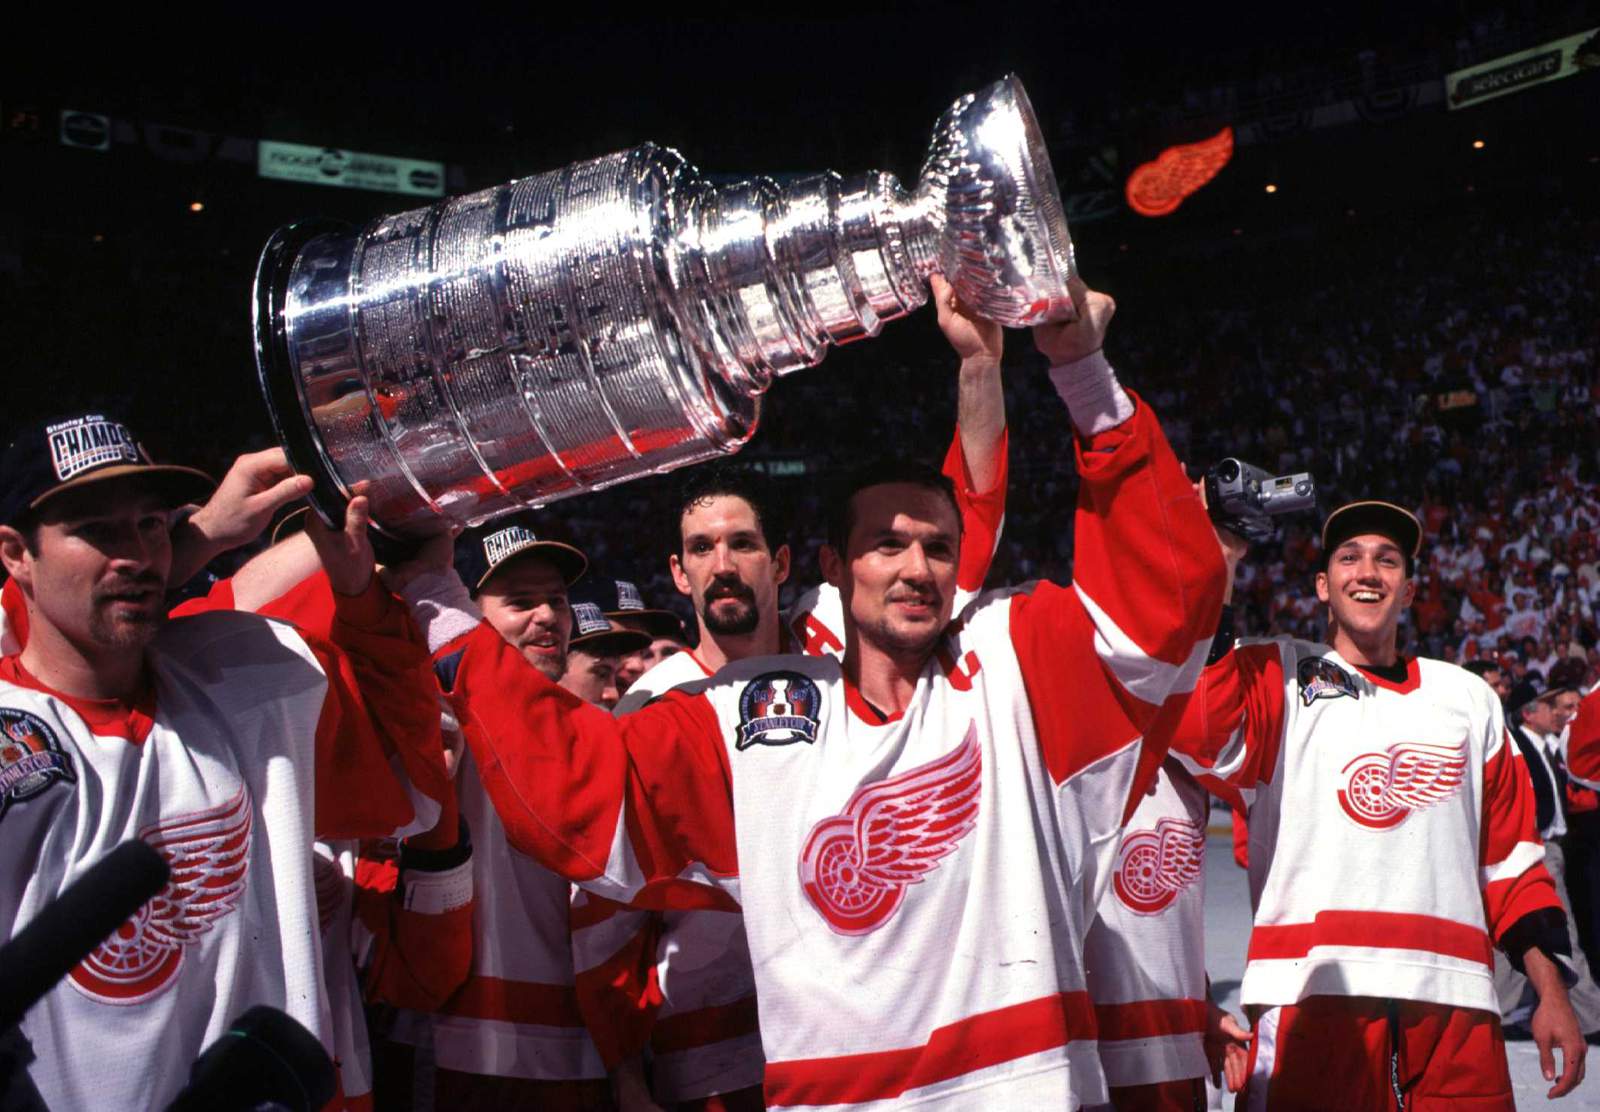 Share your Red Wings stories